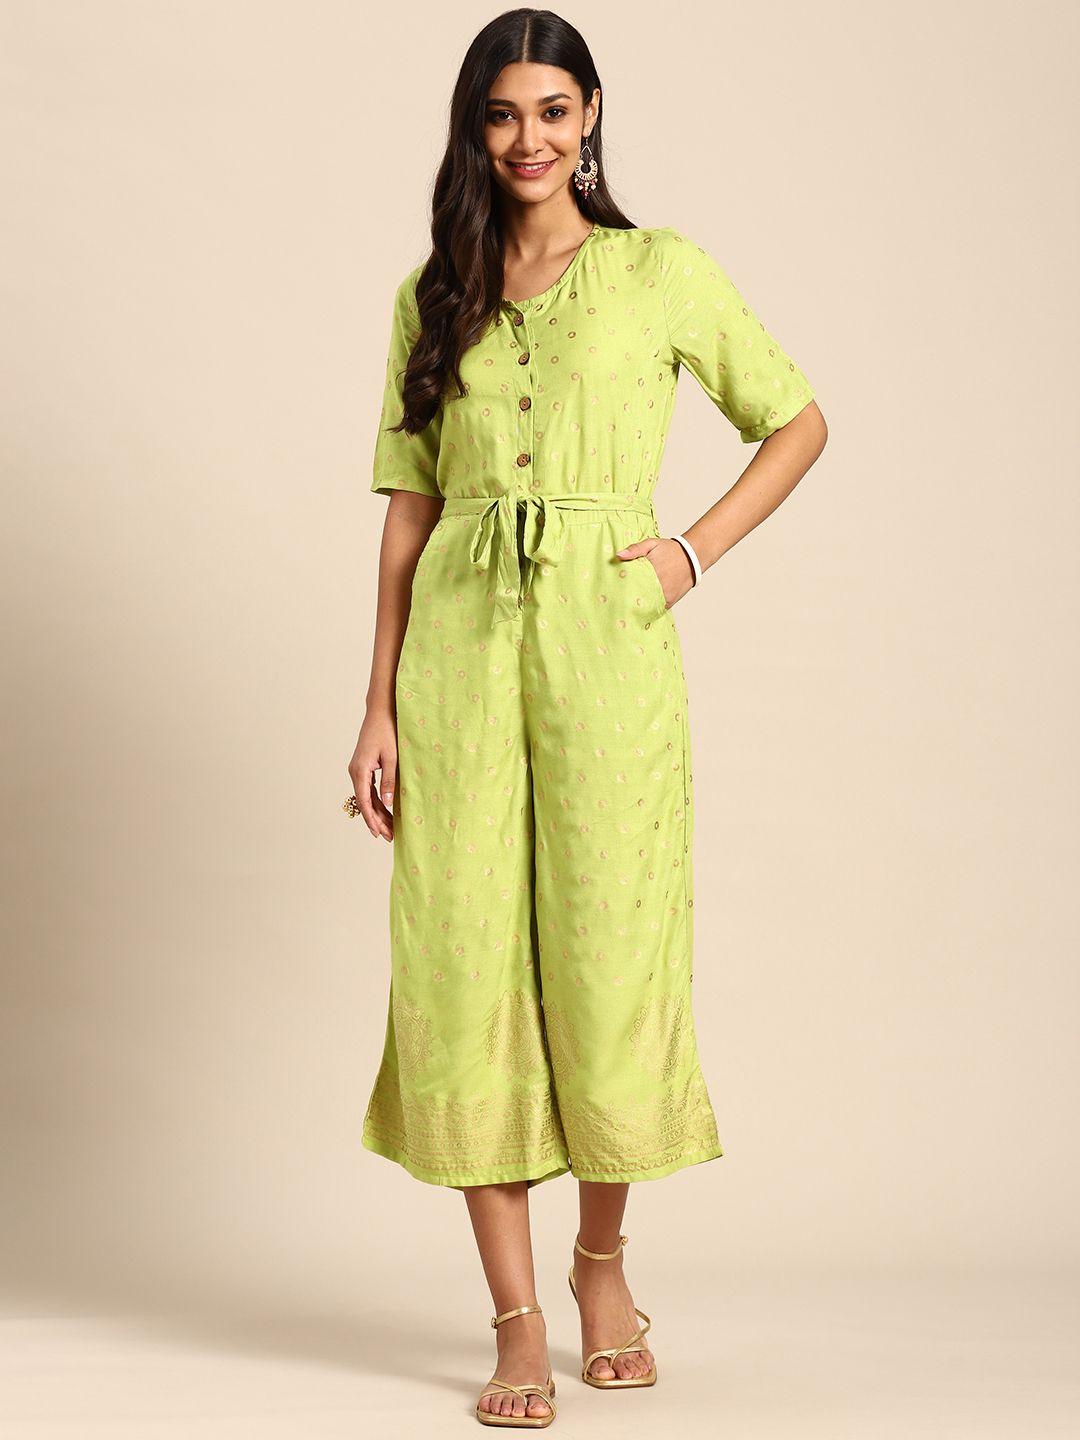 sangria green & gold-toned printed culotte jumpsuit